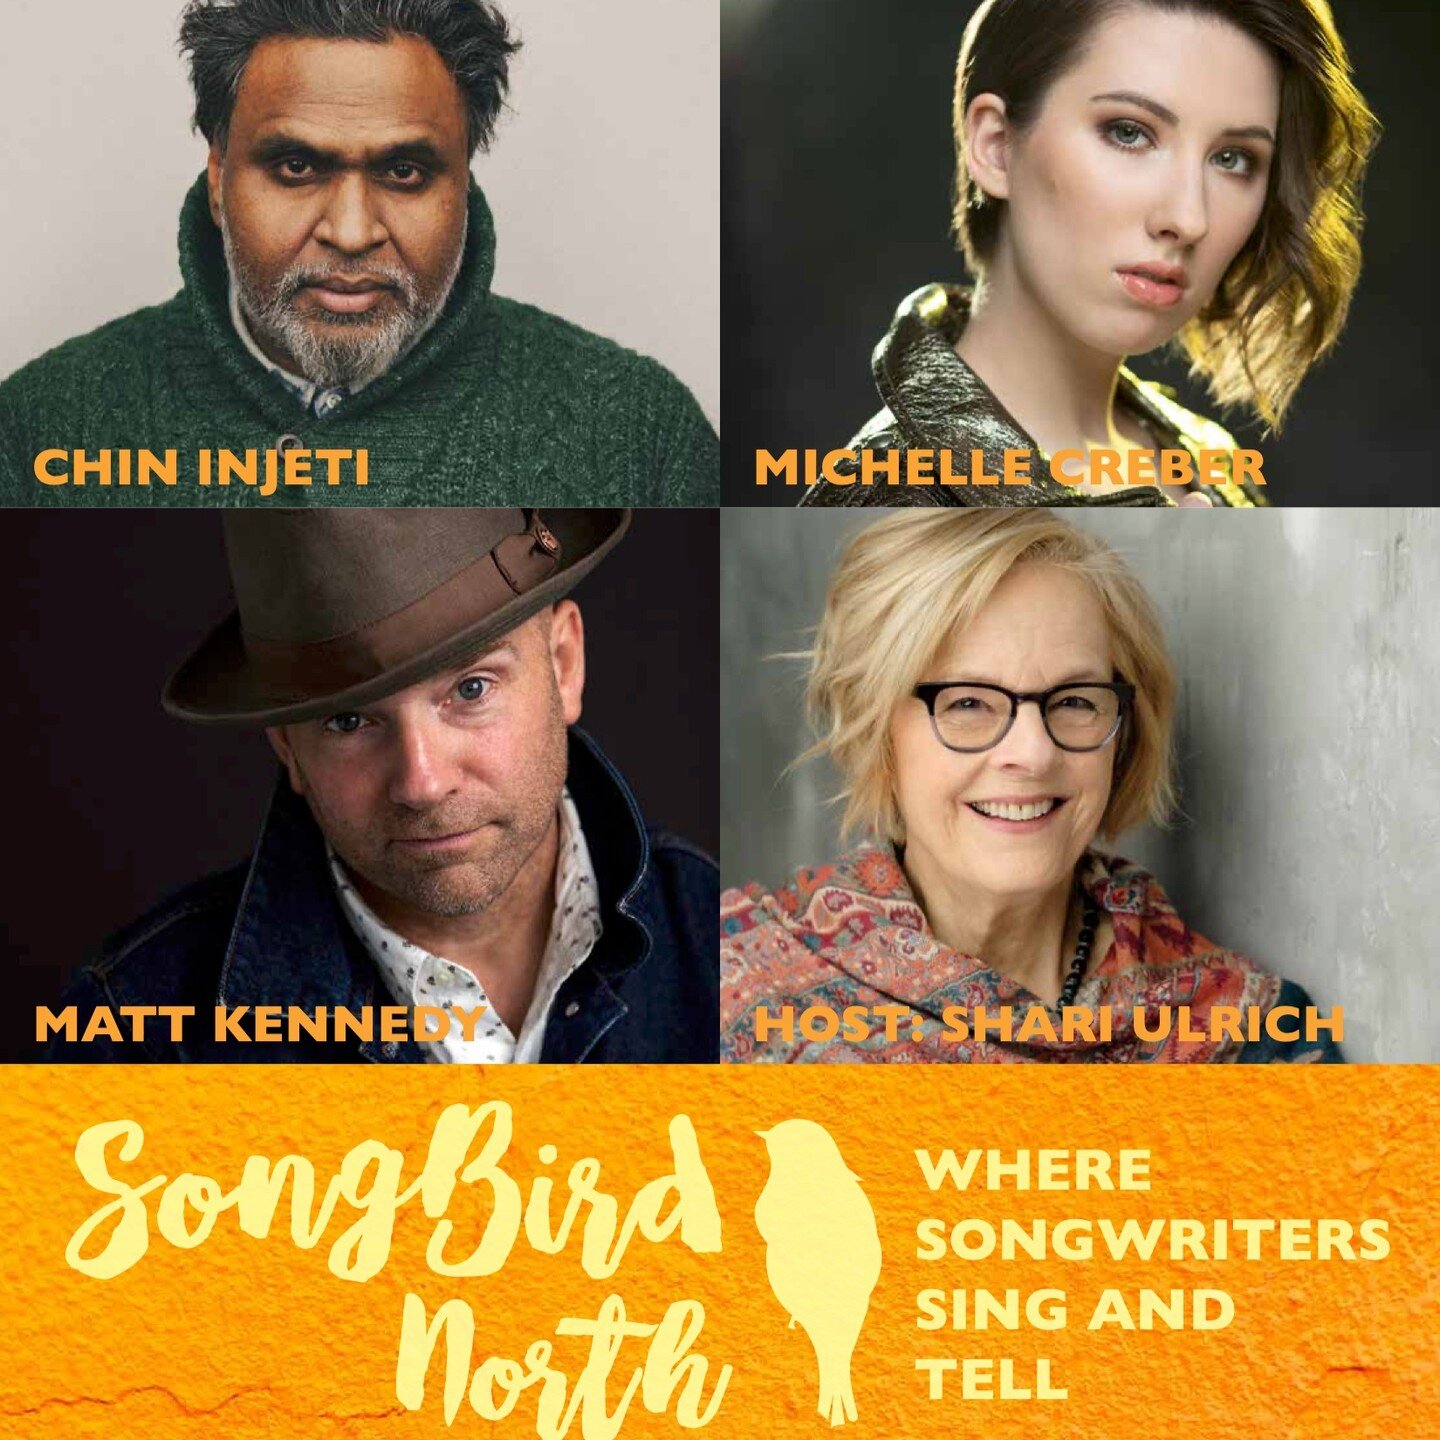 Tues. May 31 - 7:30 pm. The Roundhouse @ Davie &amp; Pacific. 4 songwriters with wildy different backgrounds, stories and styles. https://songbirdnorth.eventbrite.com or tix at the door!